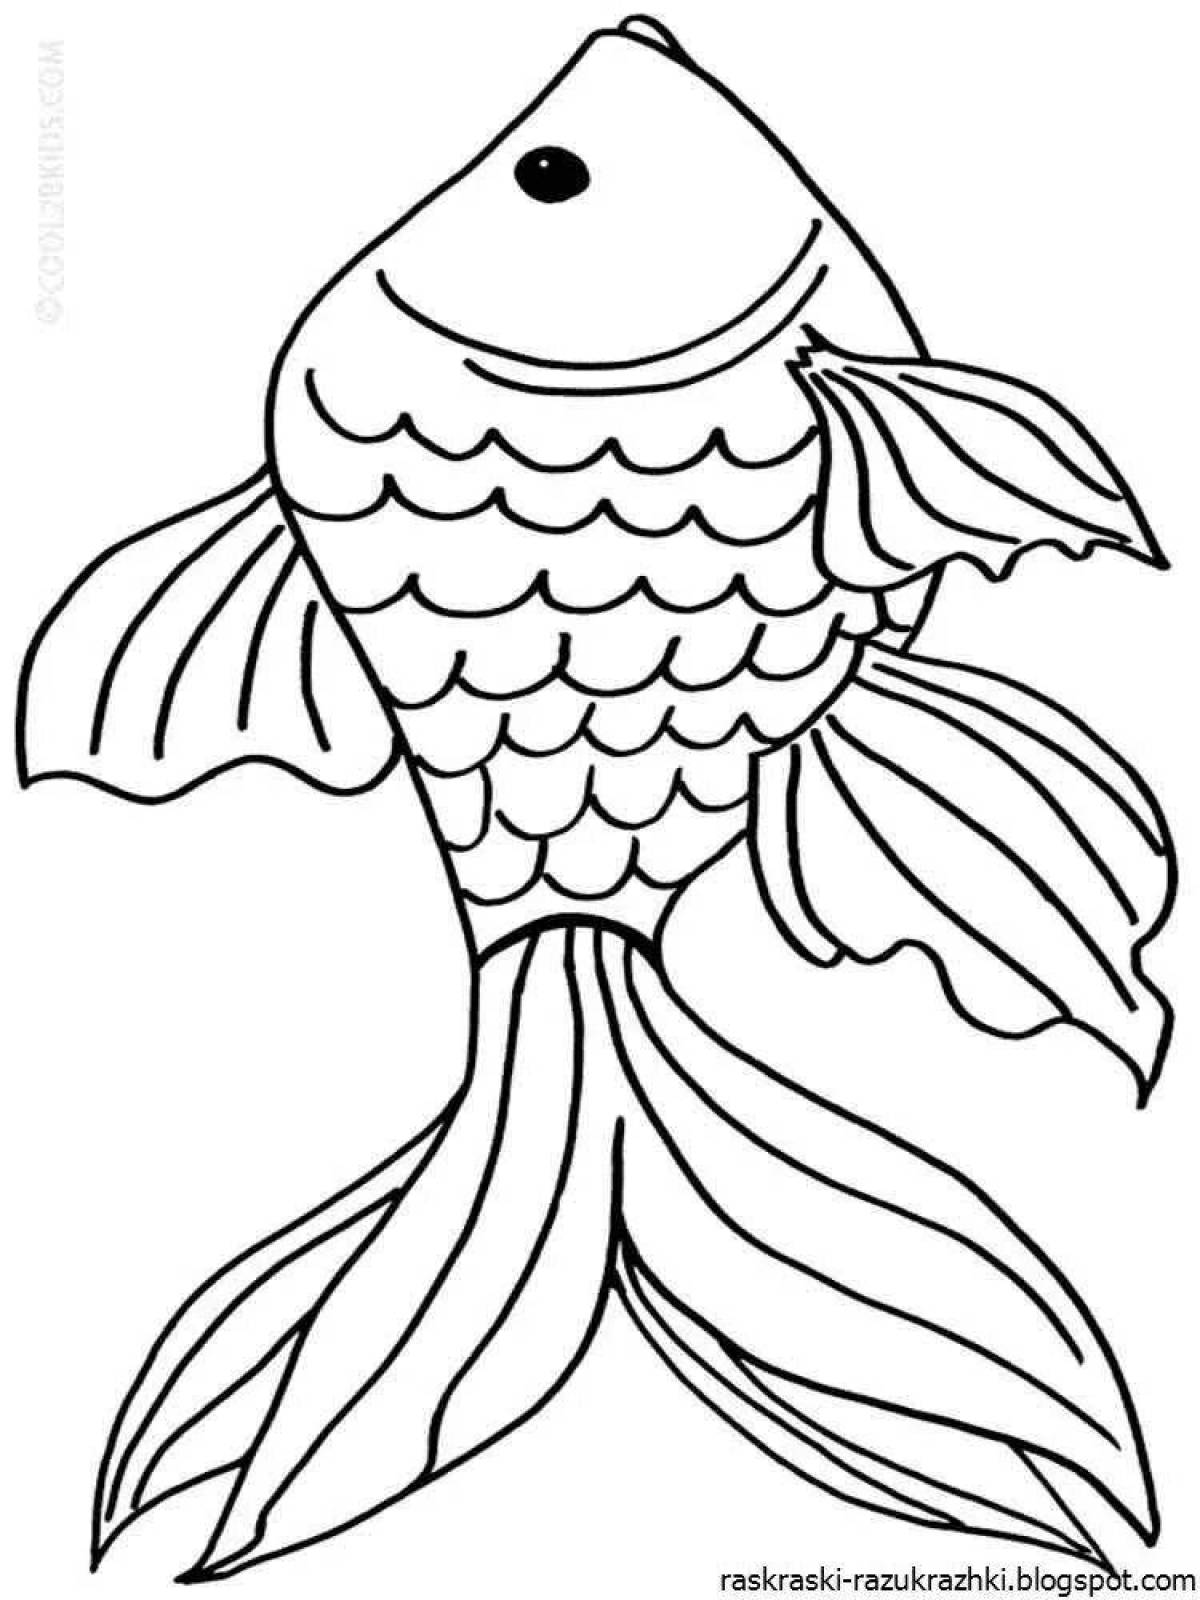 Fancy coloring goldfish for kids